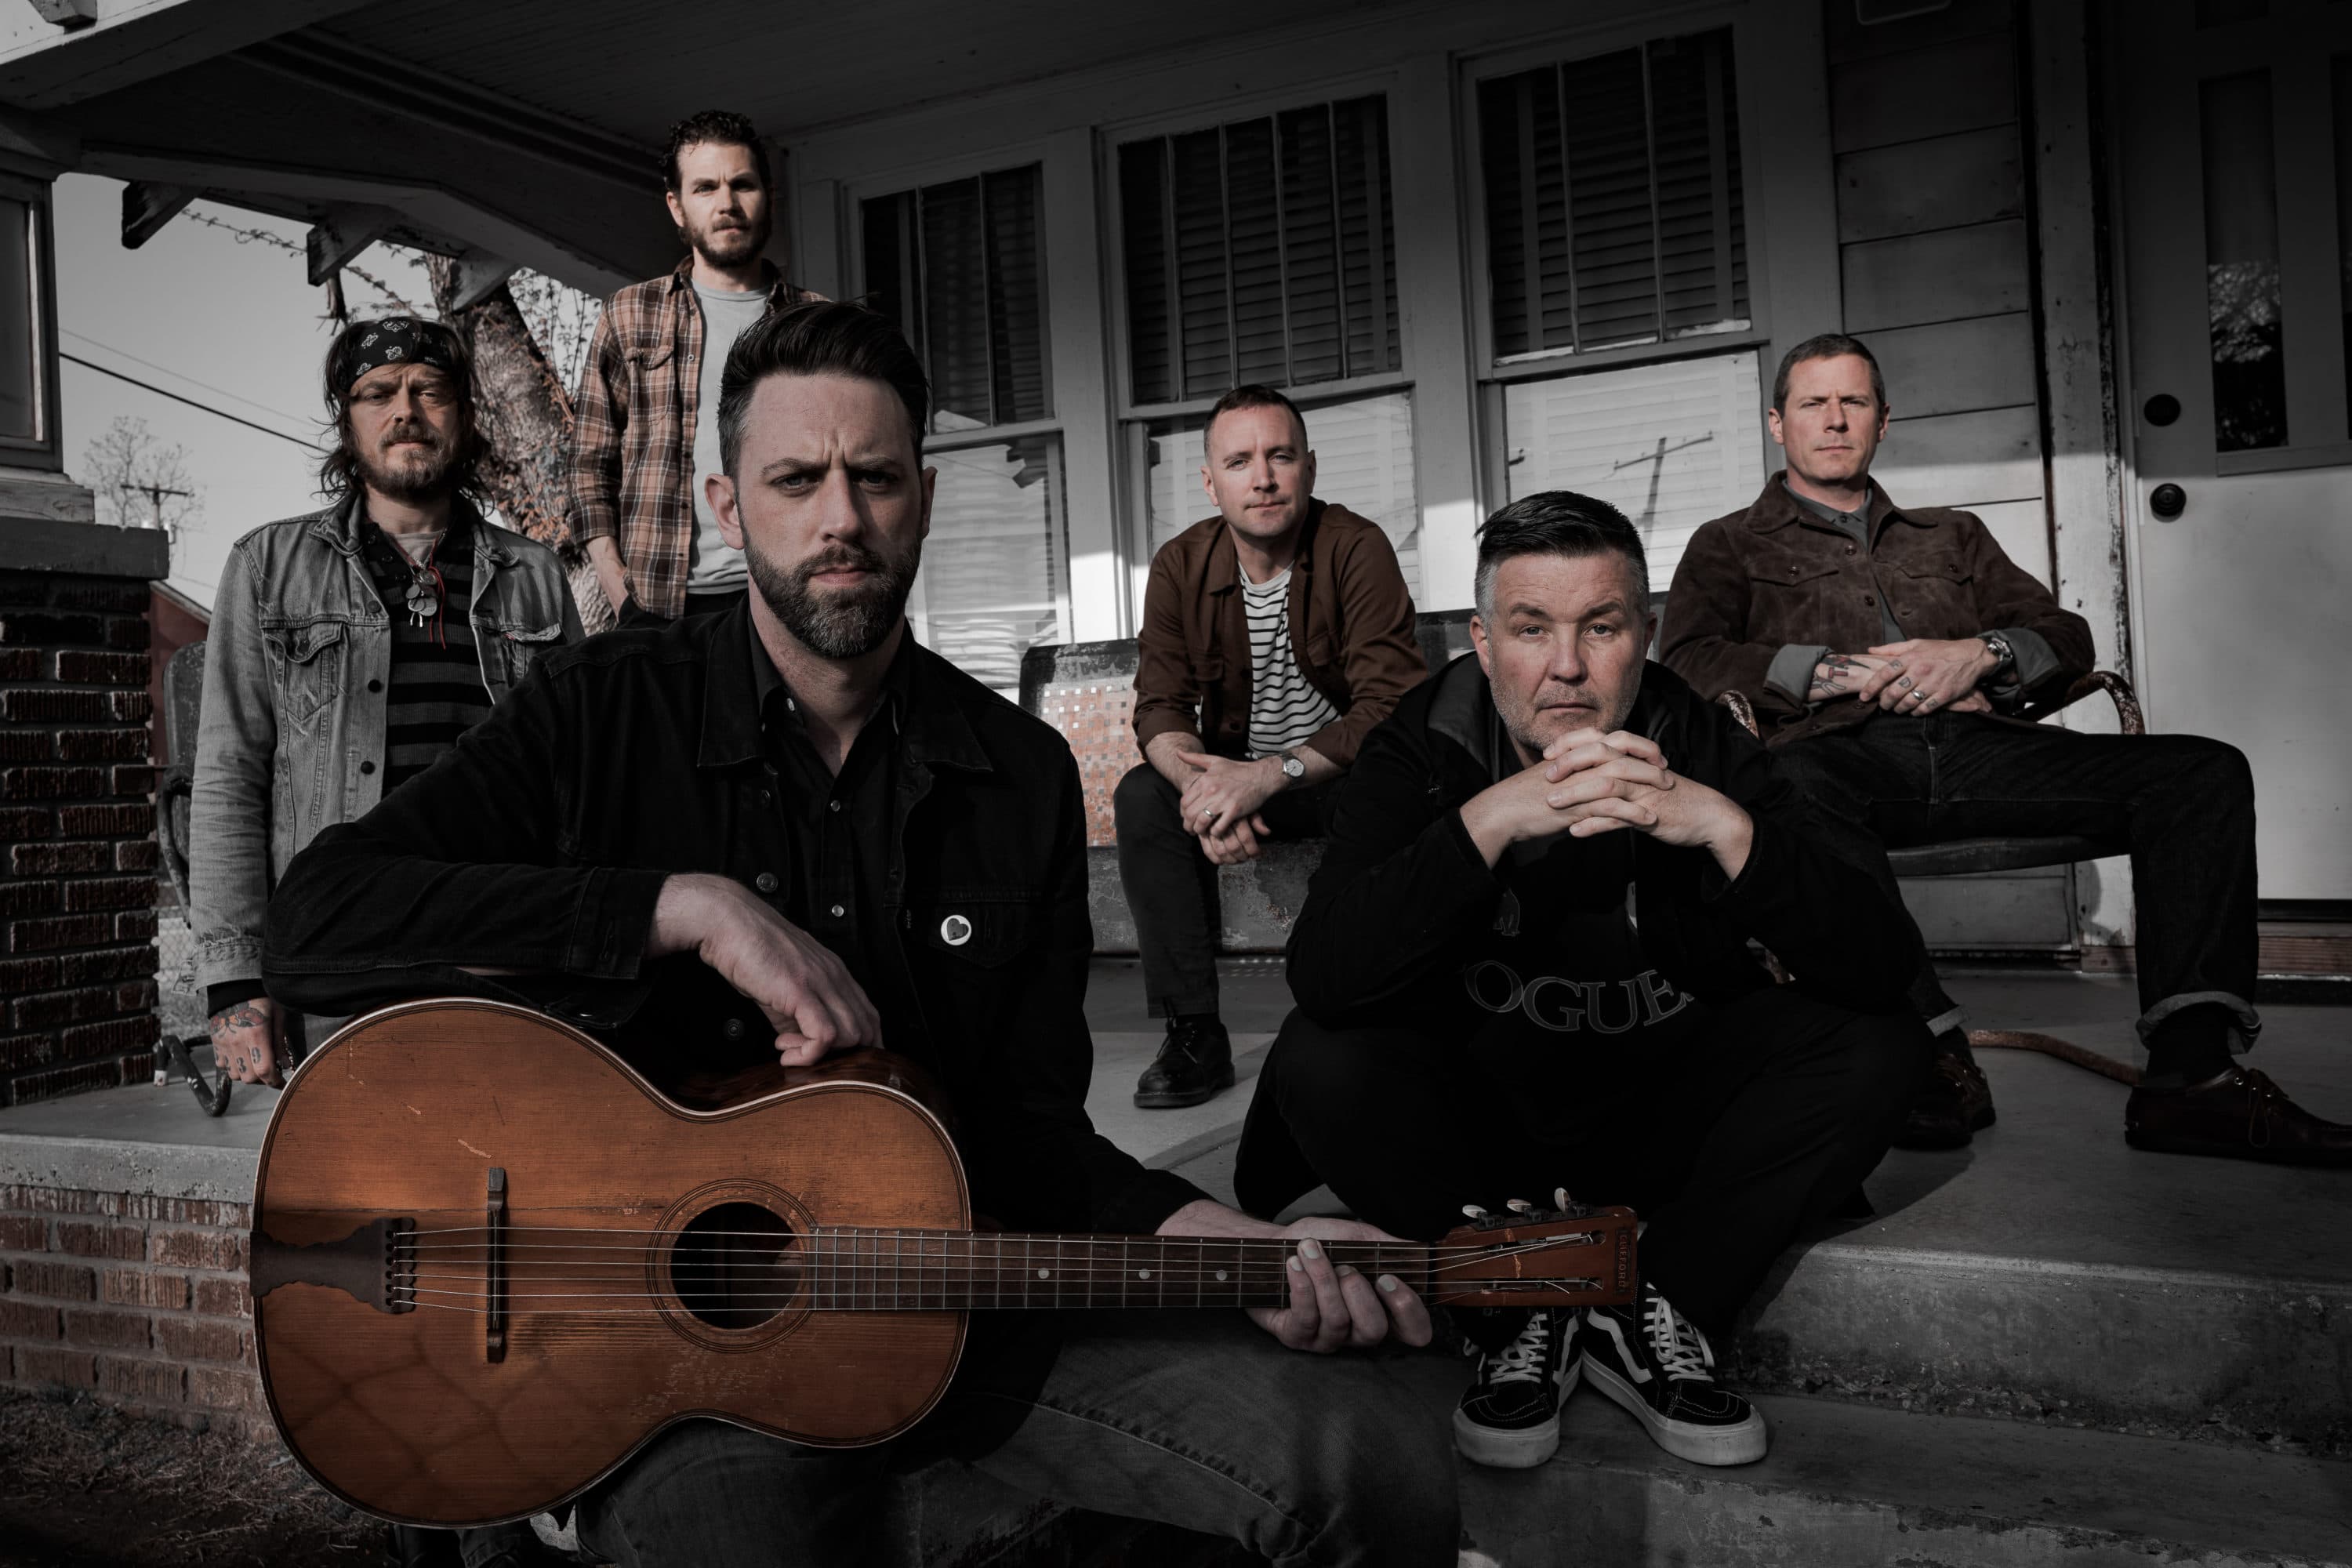 The Dropkick Murphys bring energetic punk music to the Great